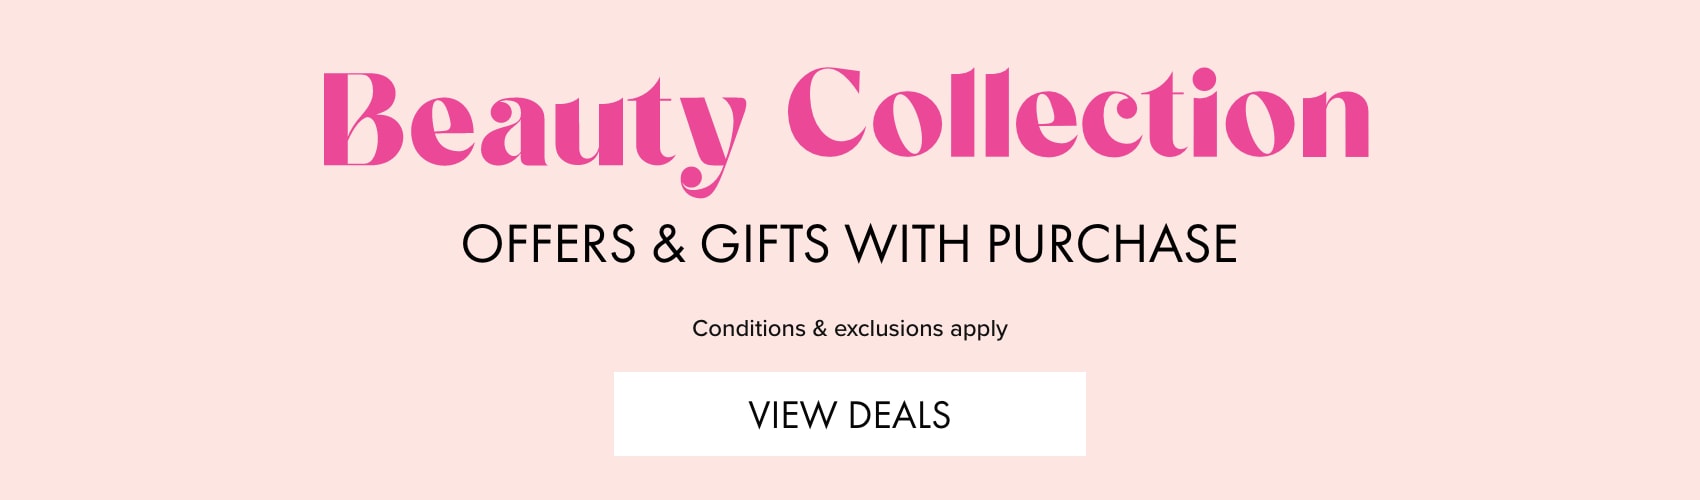 Beauty Collection Offers & Gifts with Purchase